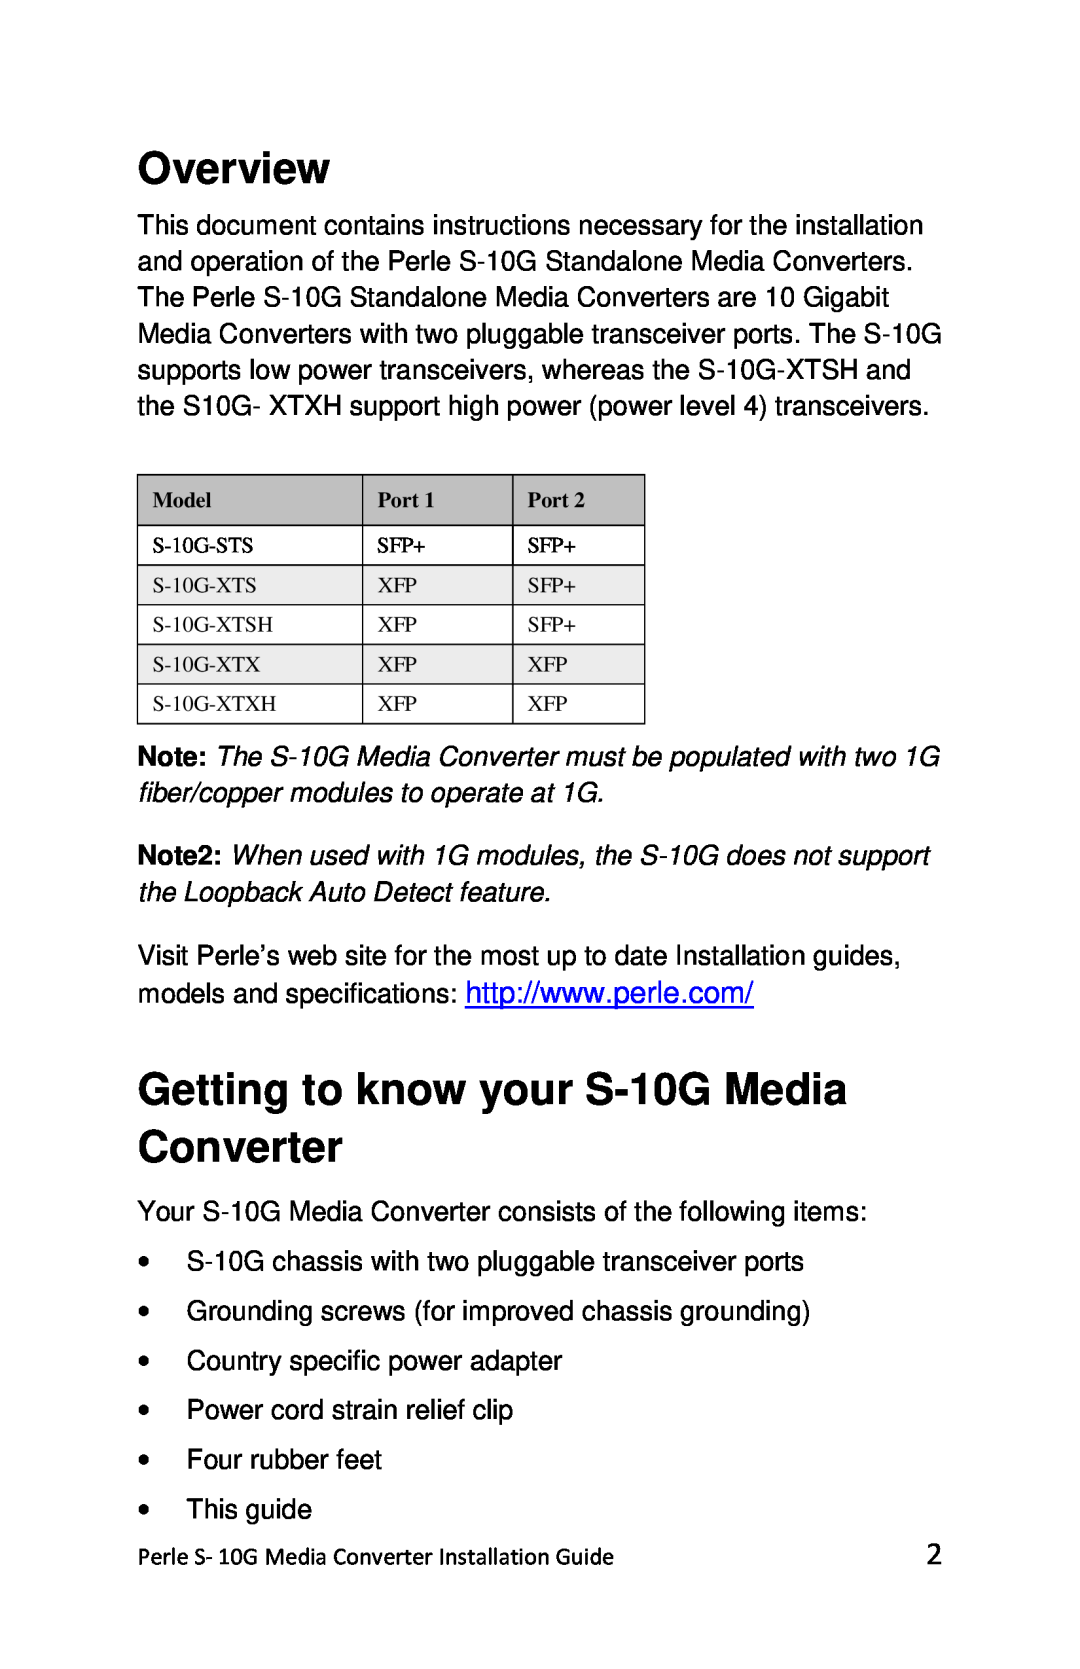 Perle Systems S-10G-XTSH, S-10G-STS, S-10G-XTXH manual Overview, Getting to know your S-10G Media Converter 